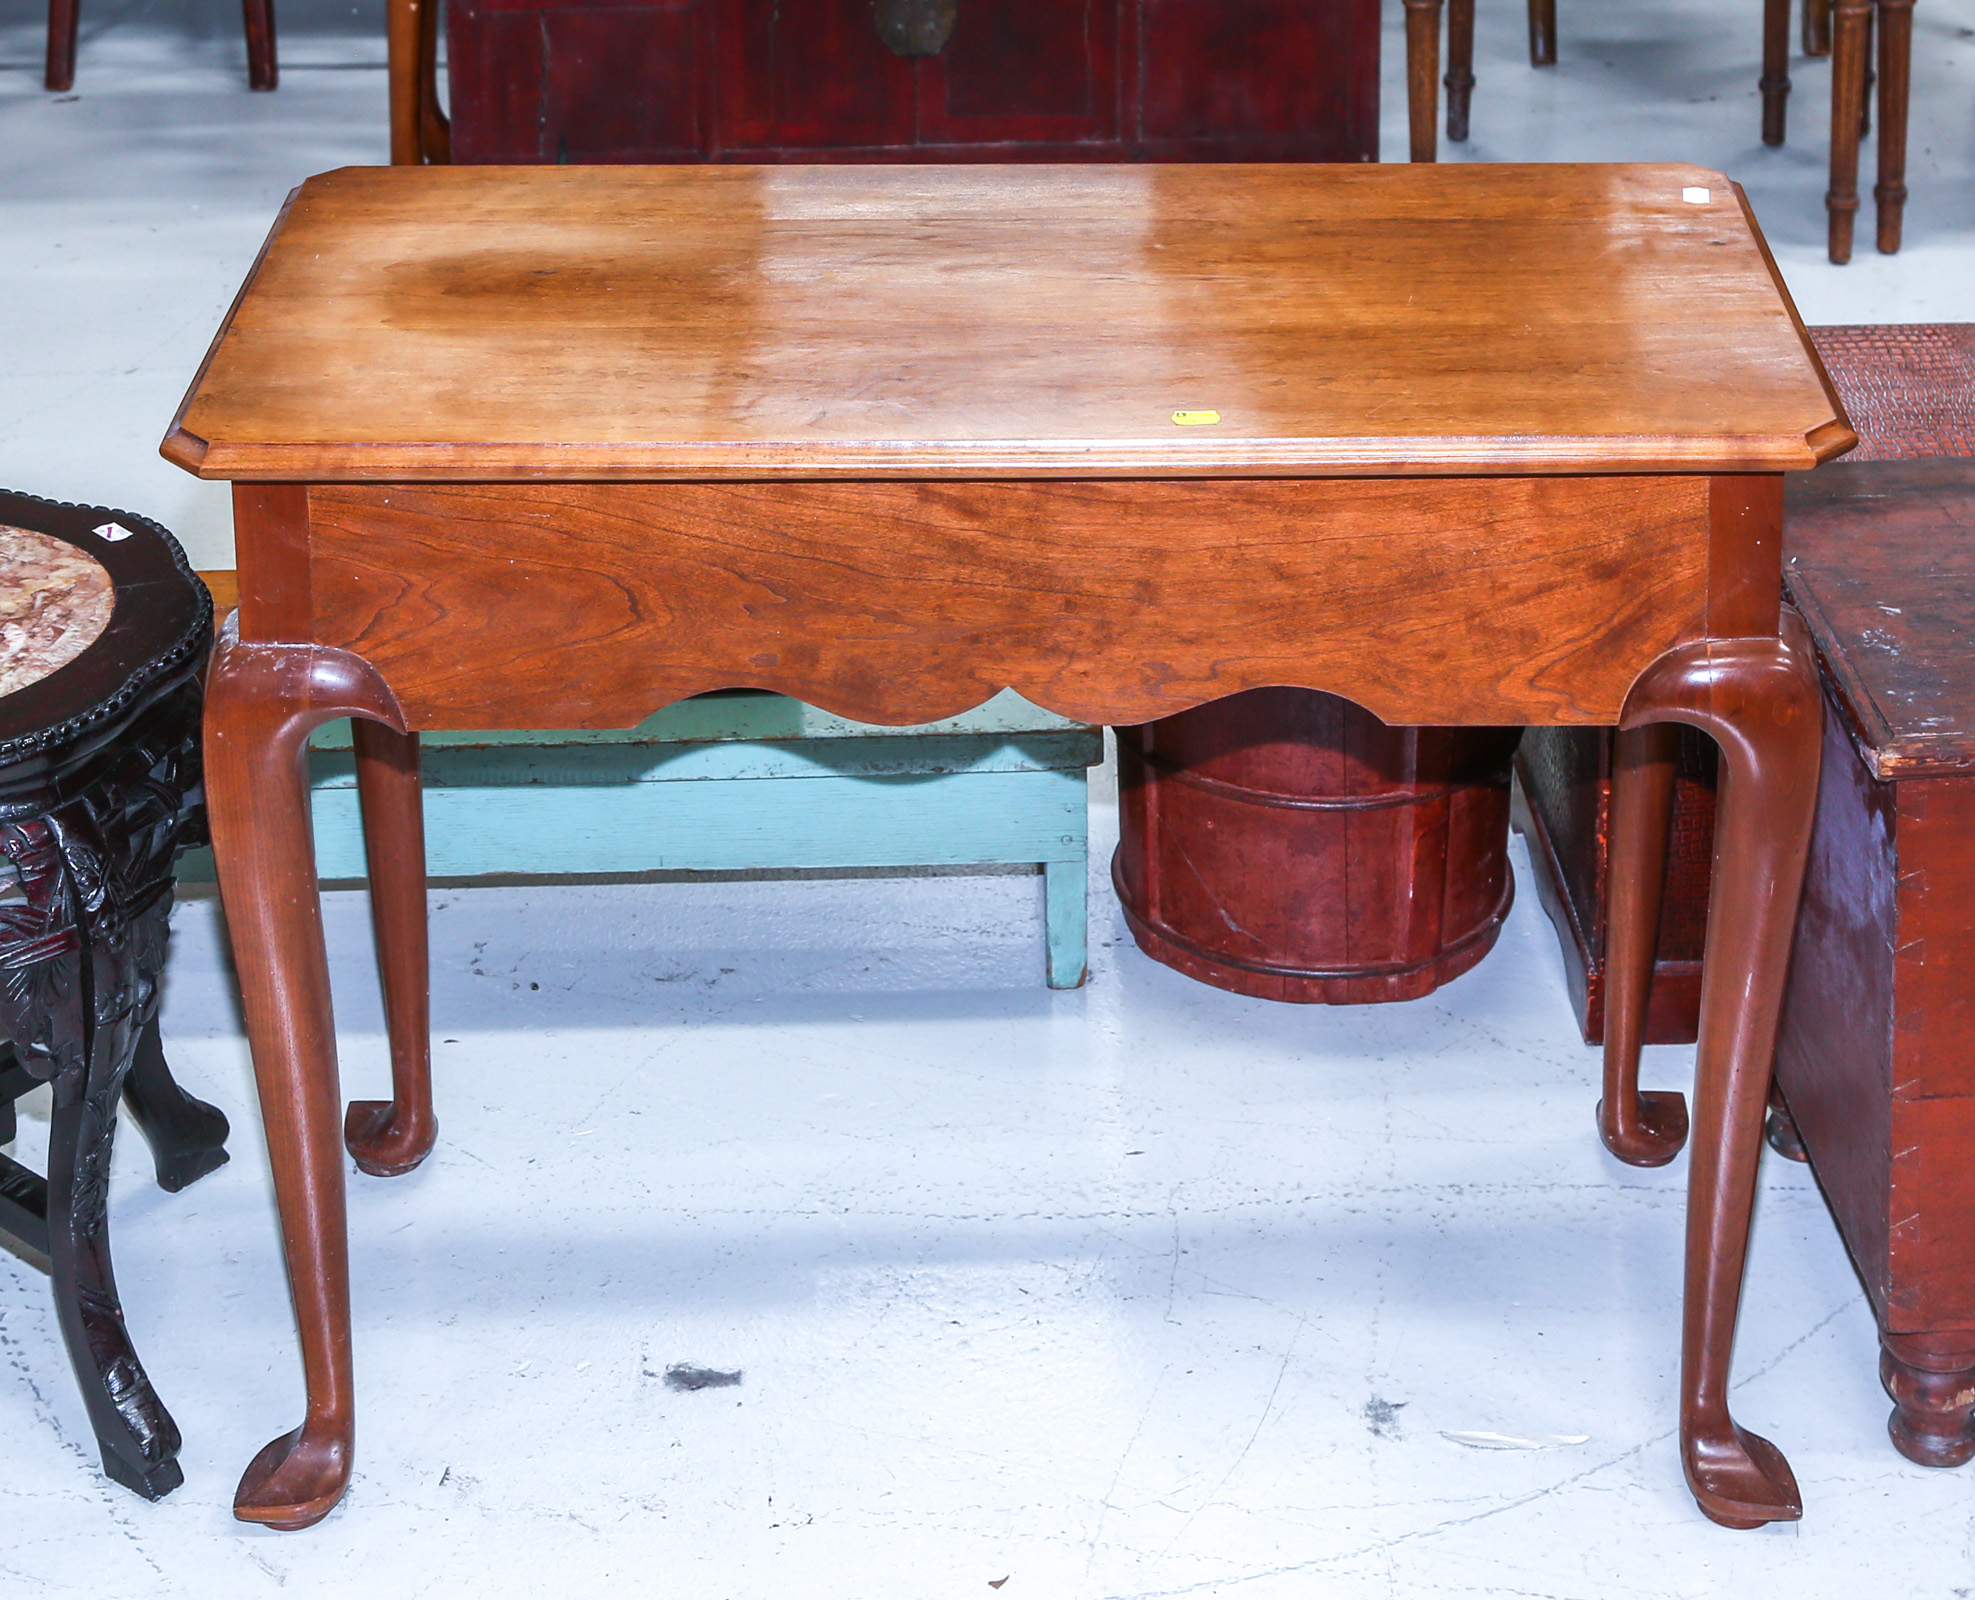 QUEEN ANNE STYLE CHERRY SOFA TABLE Later